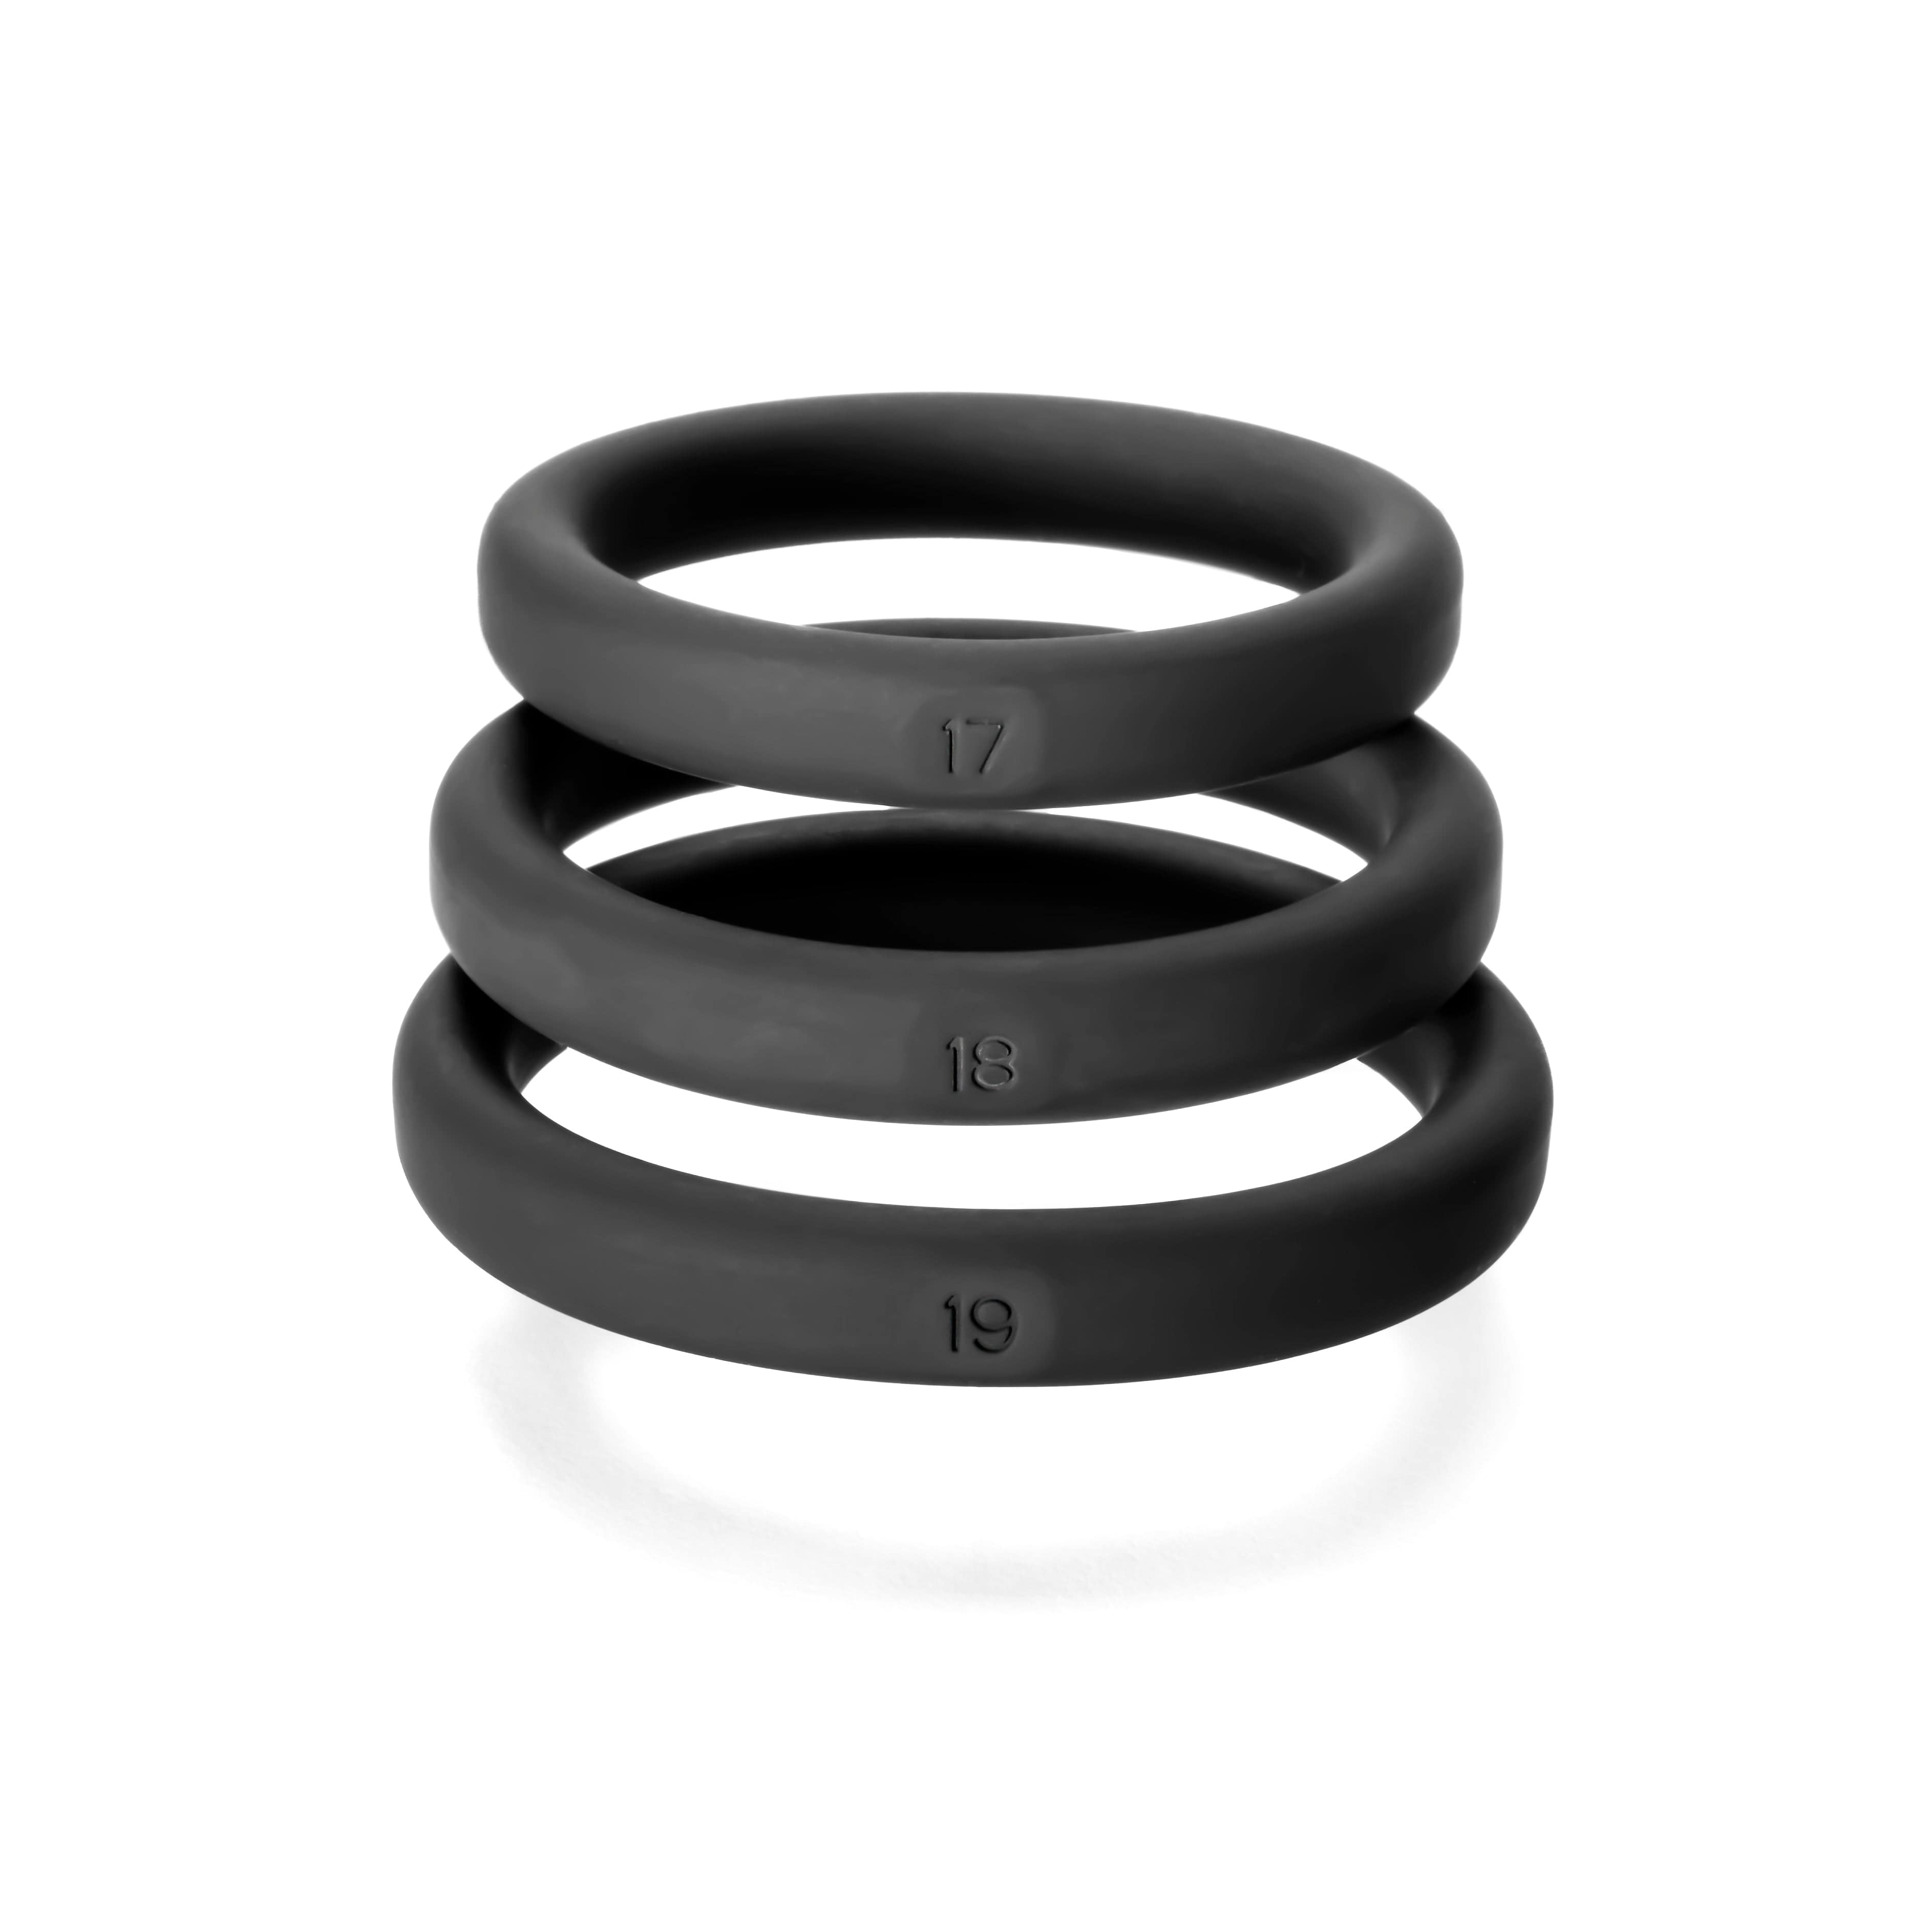 Silicone Rings for Men by Rinfit – Infinity Collection – 2 Rubber rings Set  : สำนักงานสิทธิประโยชน์ มหาวิทยาลัยรังสิต